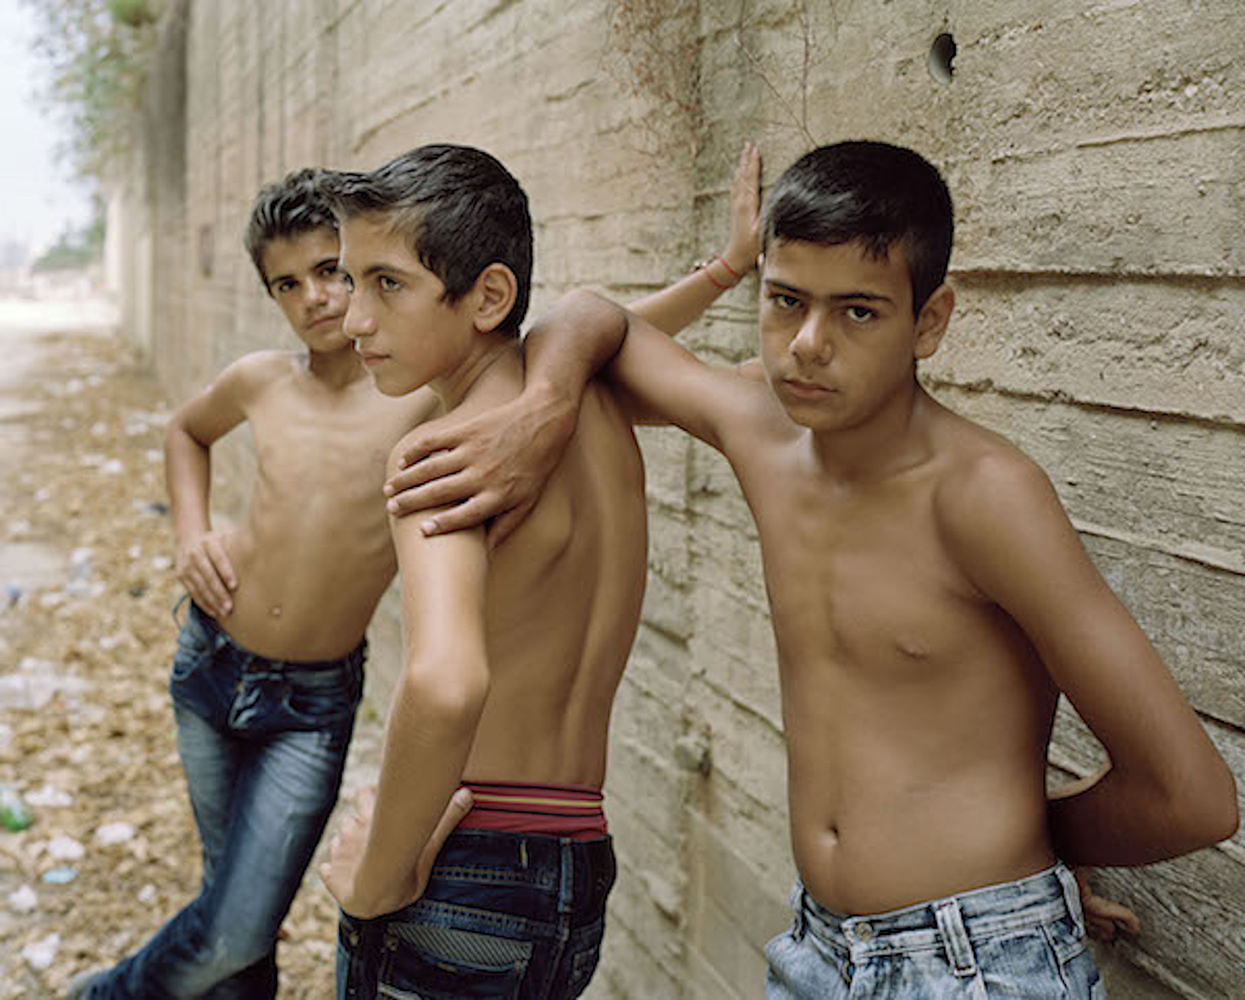  image © George Awde, from the series  Beirut  